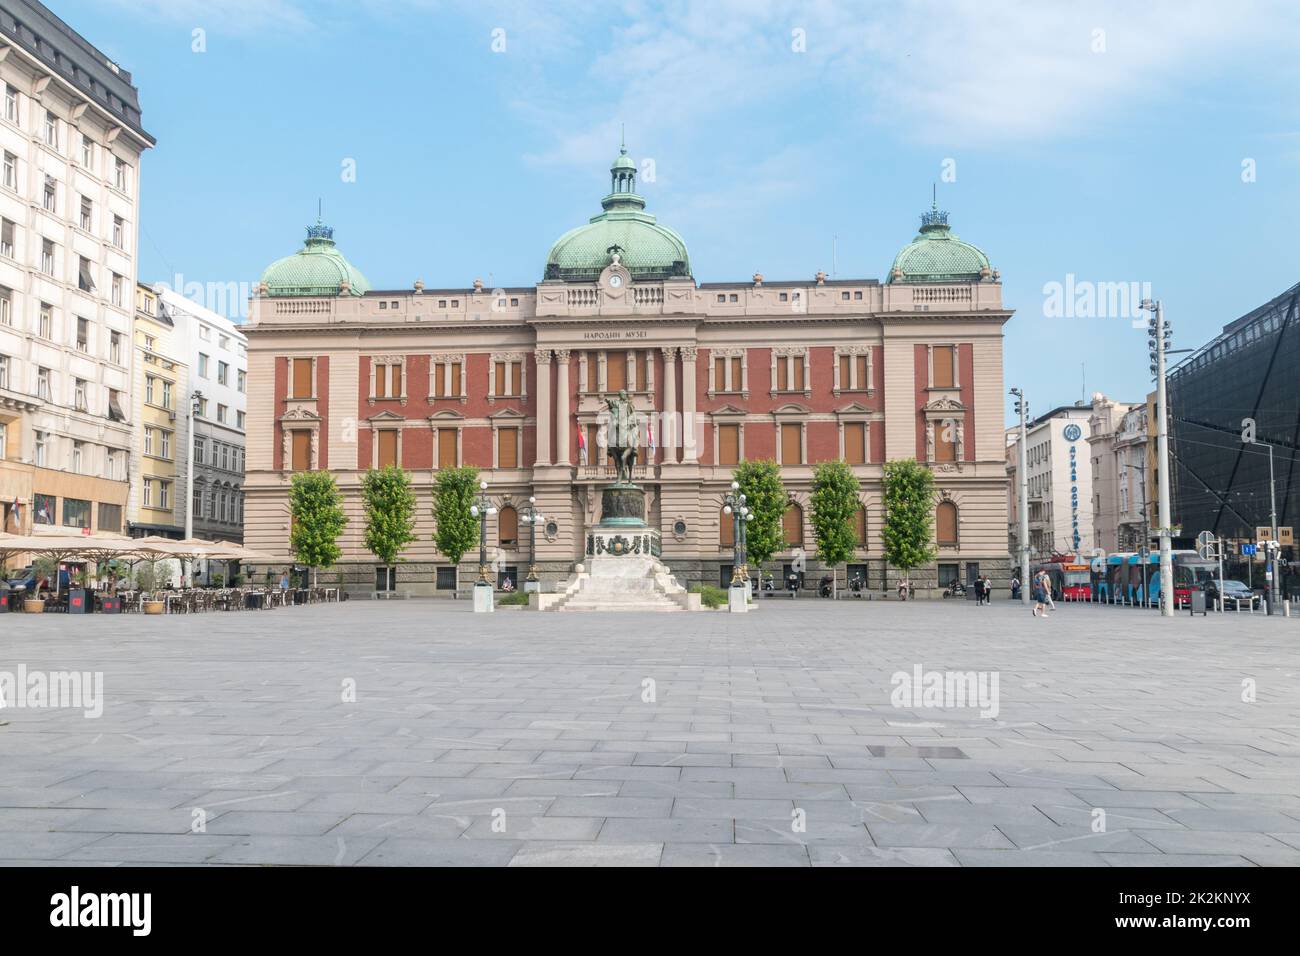 Belgrade, Serbia - June 7, 2022: Republic Square with the statue of Prince Mihailo and front facade of the National Museum of Serbia. Stock Photo